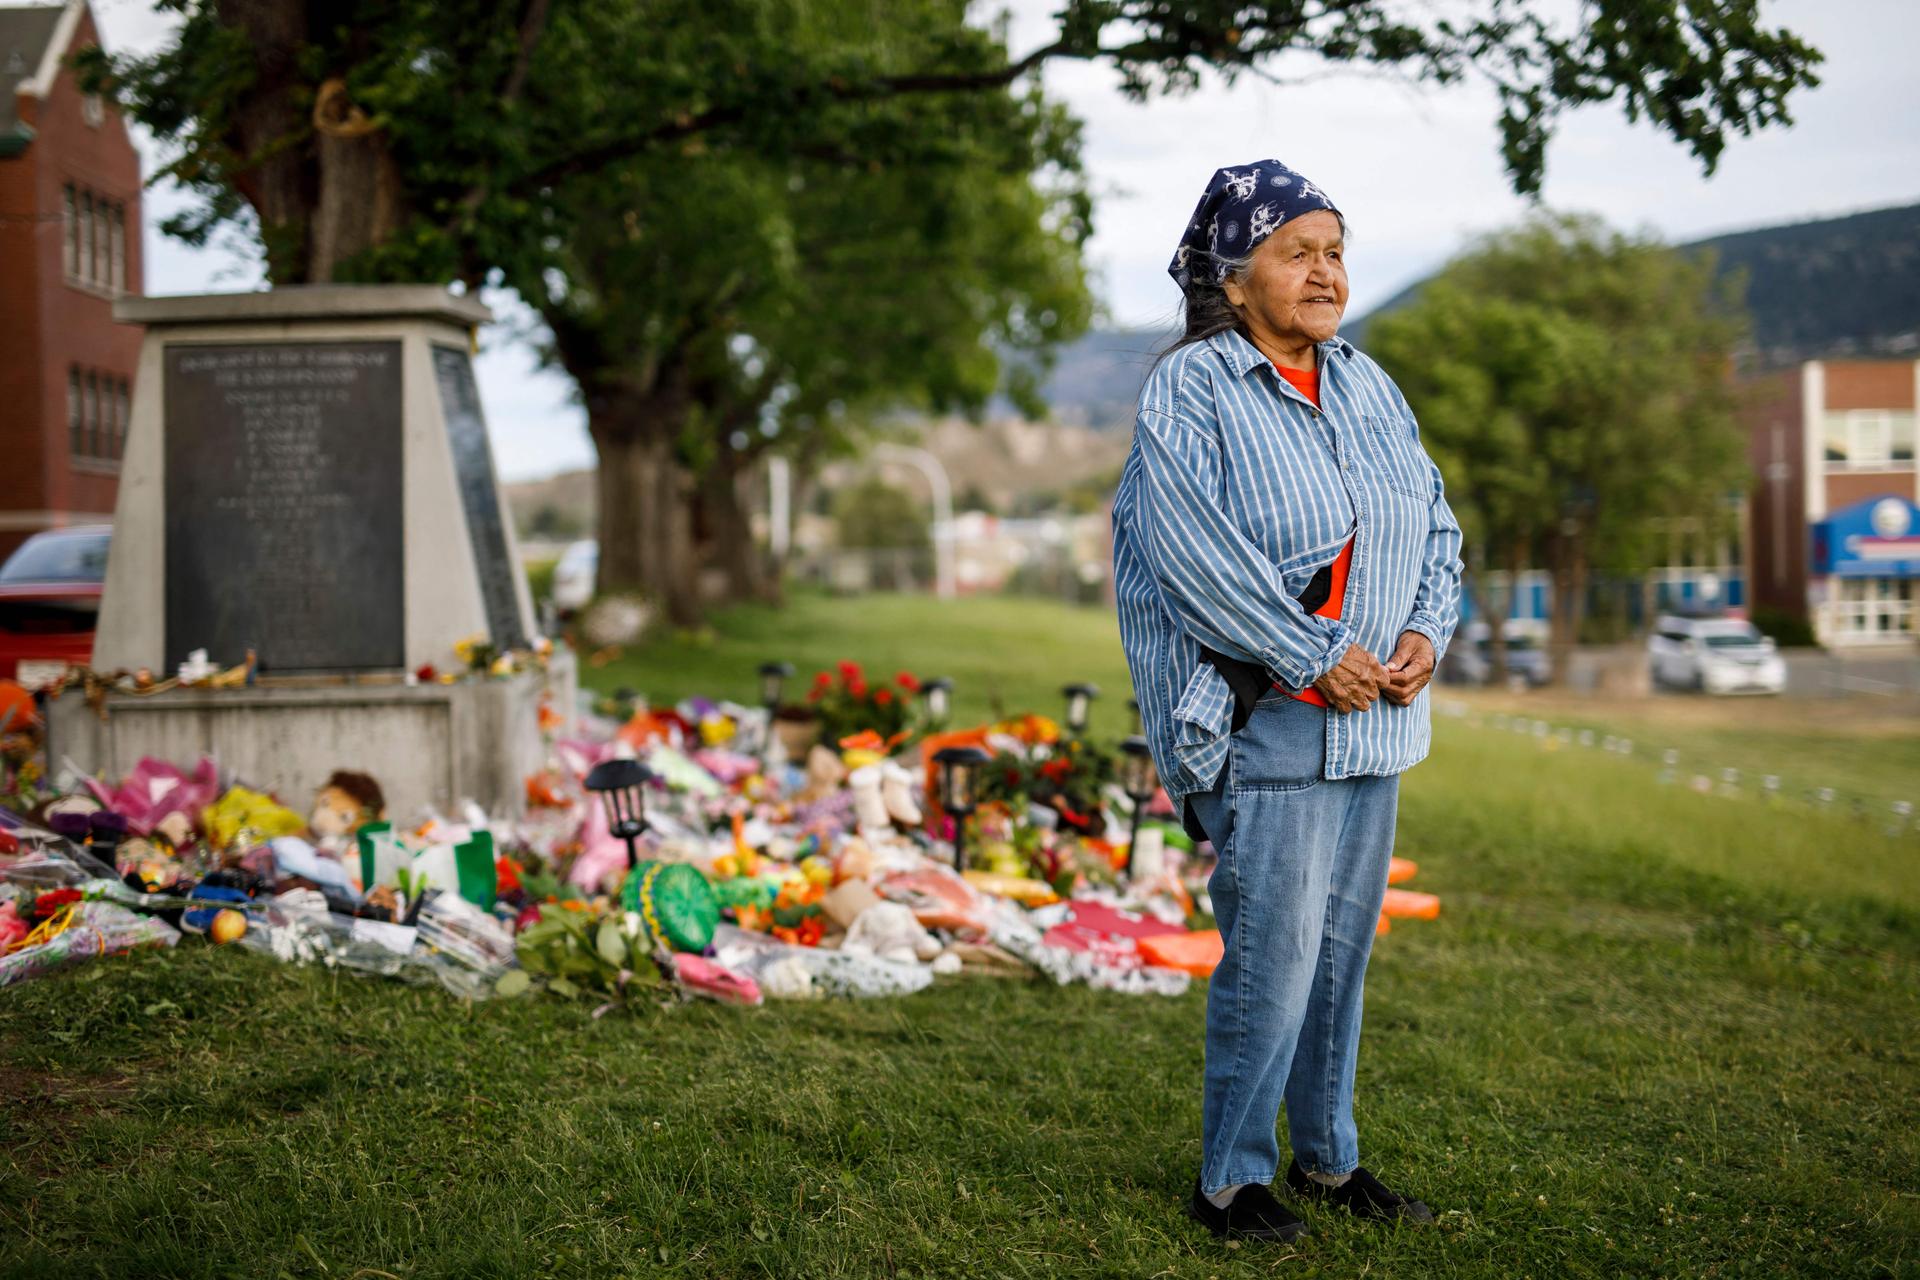 Kamloops Indian Residential School former student Evelyn Camille, 82, at a makeshift memorial to the 215 children whose remains were discovered buried near the facility in British Columbia.